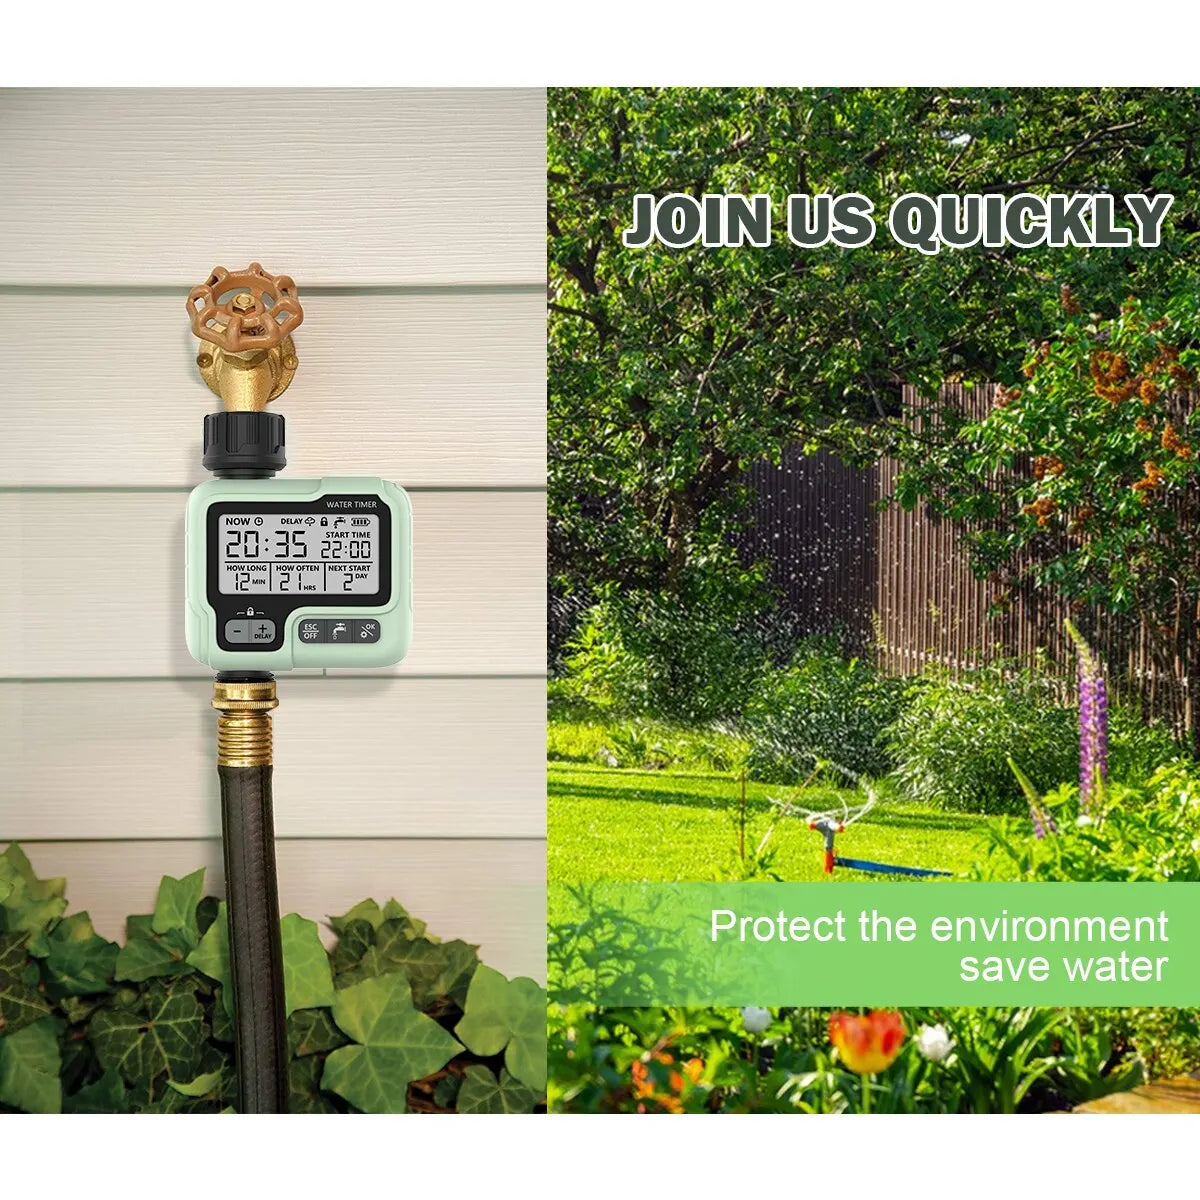 Automatic Water Timer Garden Digital Irrigation Machine Intelligent Sprinkler Used Outdoor to Save Water&Time